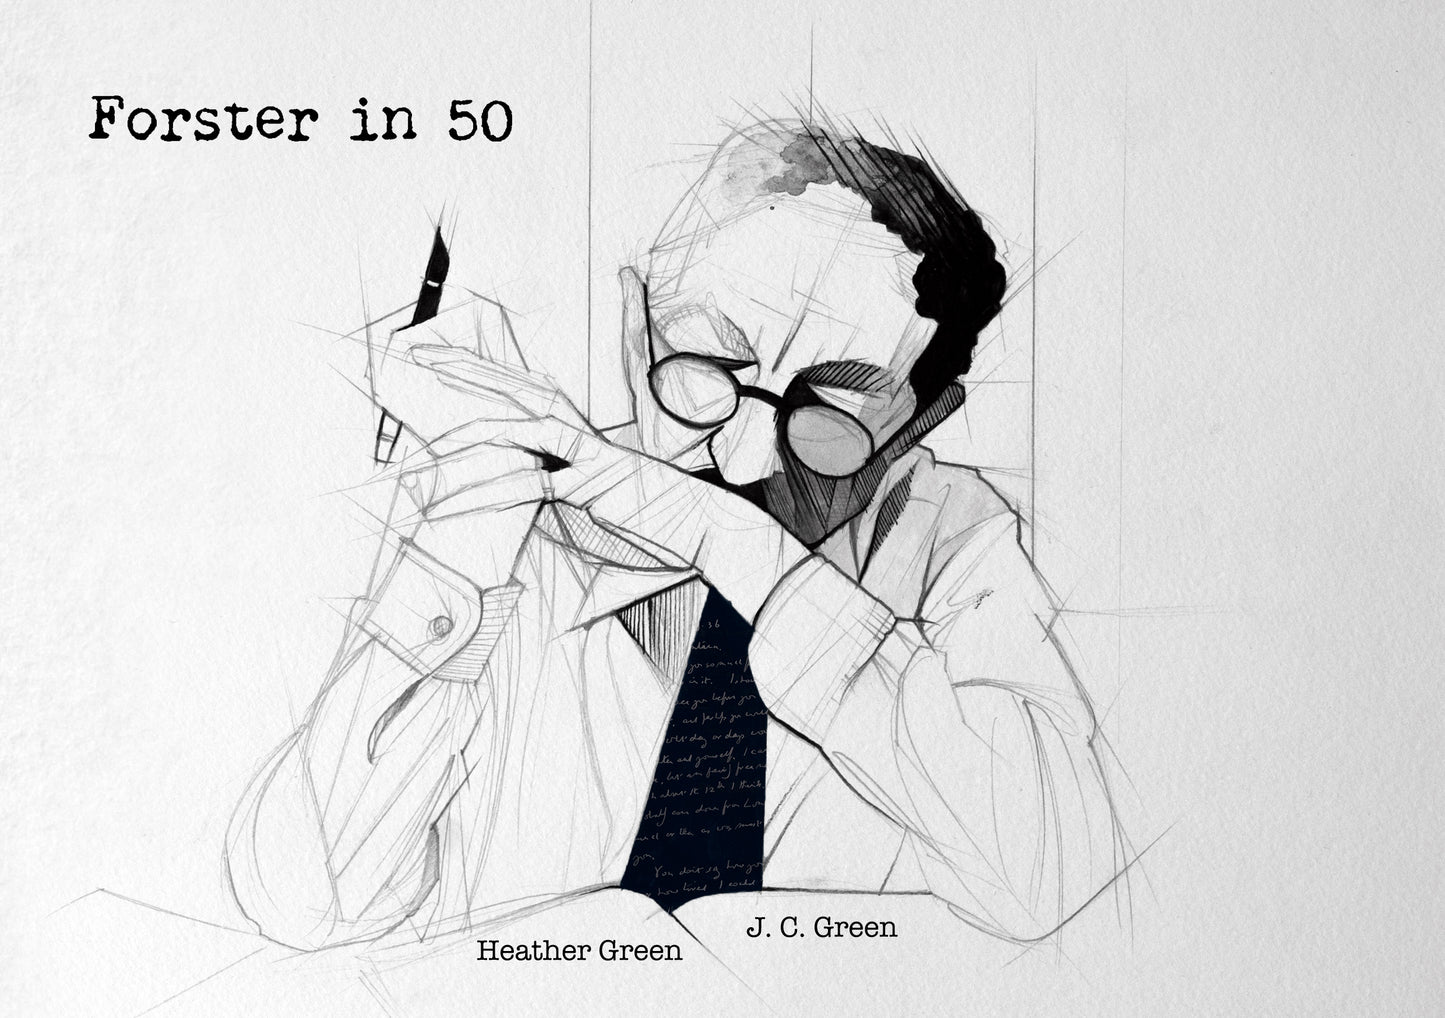 Forster in 50 by Heather Green with illustrations by JC Green